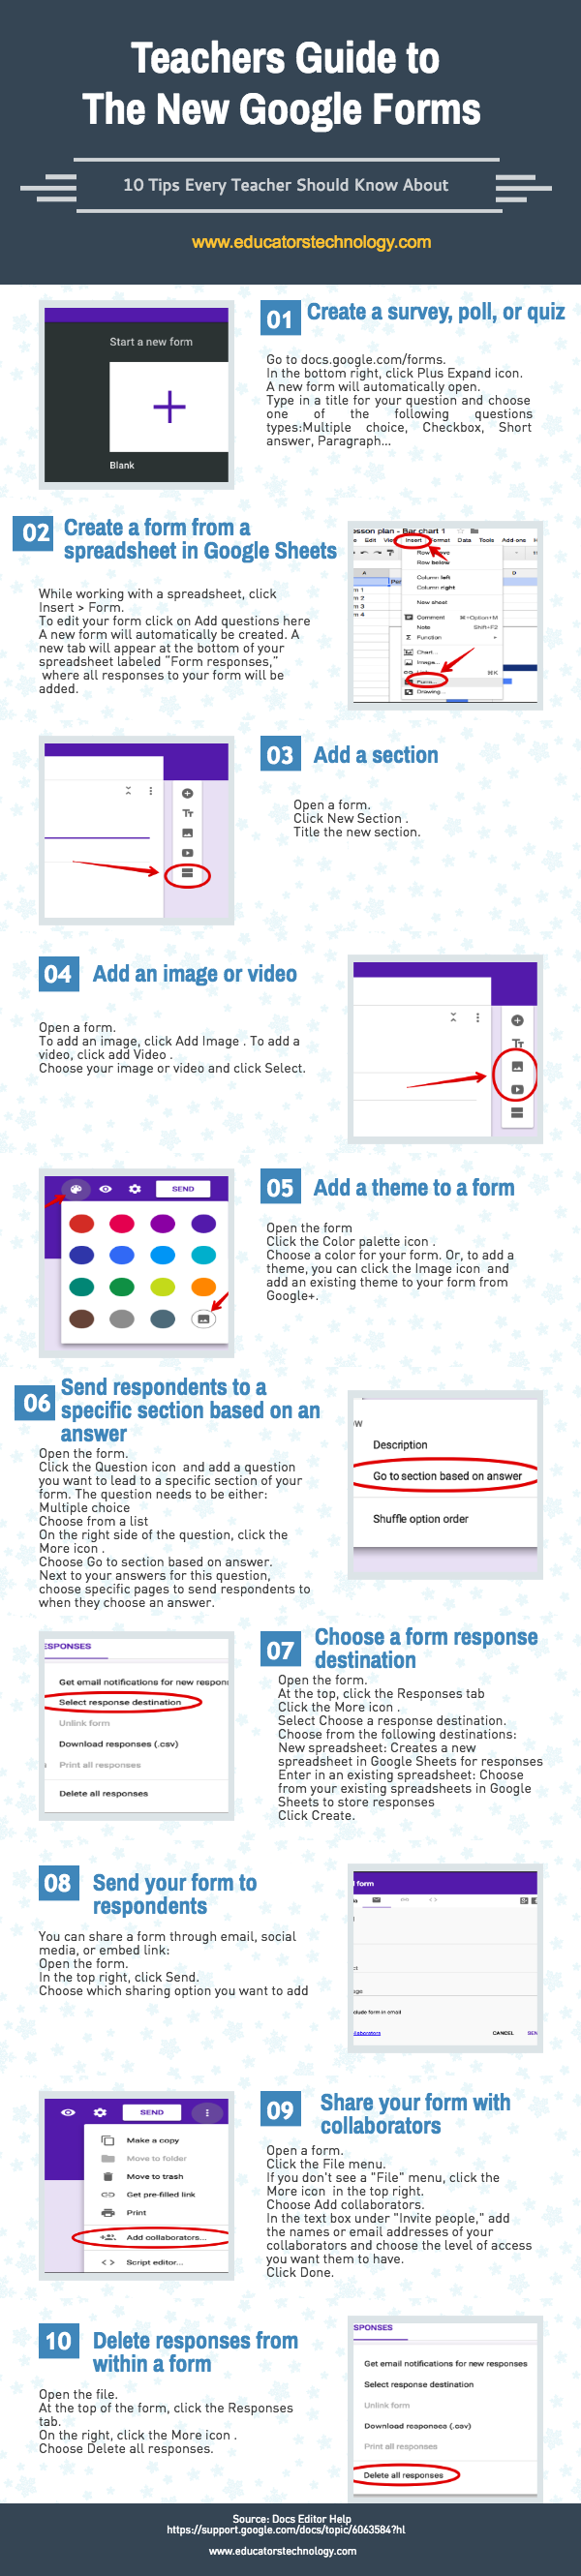 10 Important Tasks Teachers Can Do on The New Google Forms